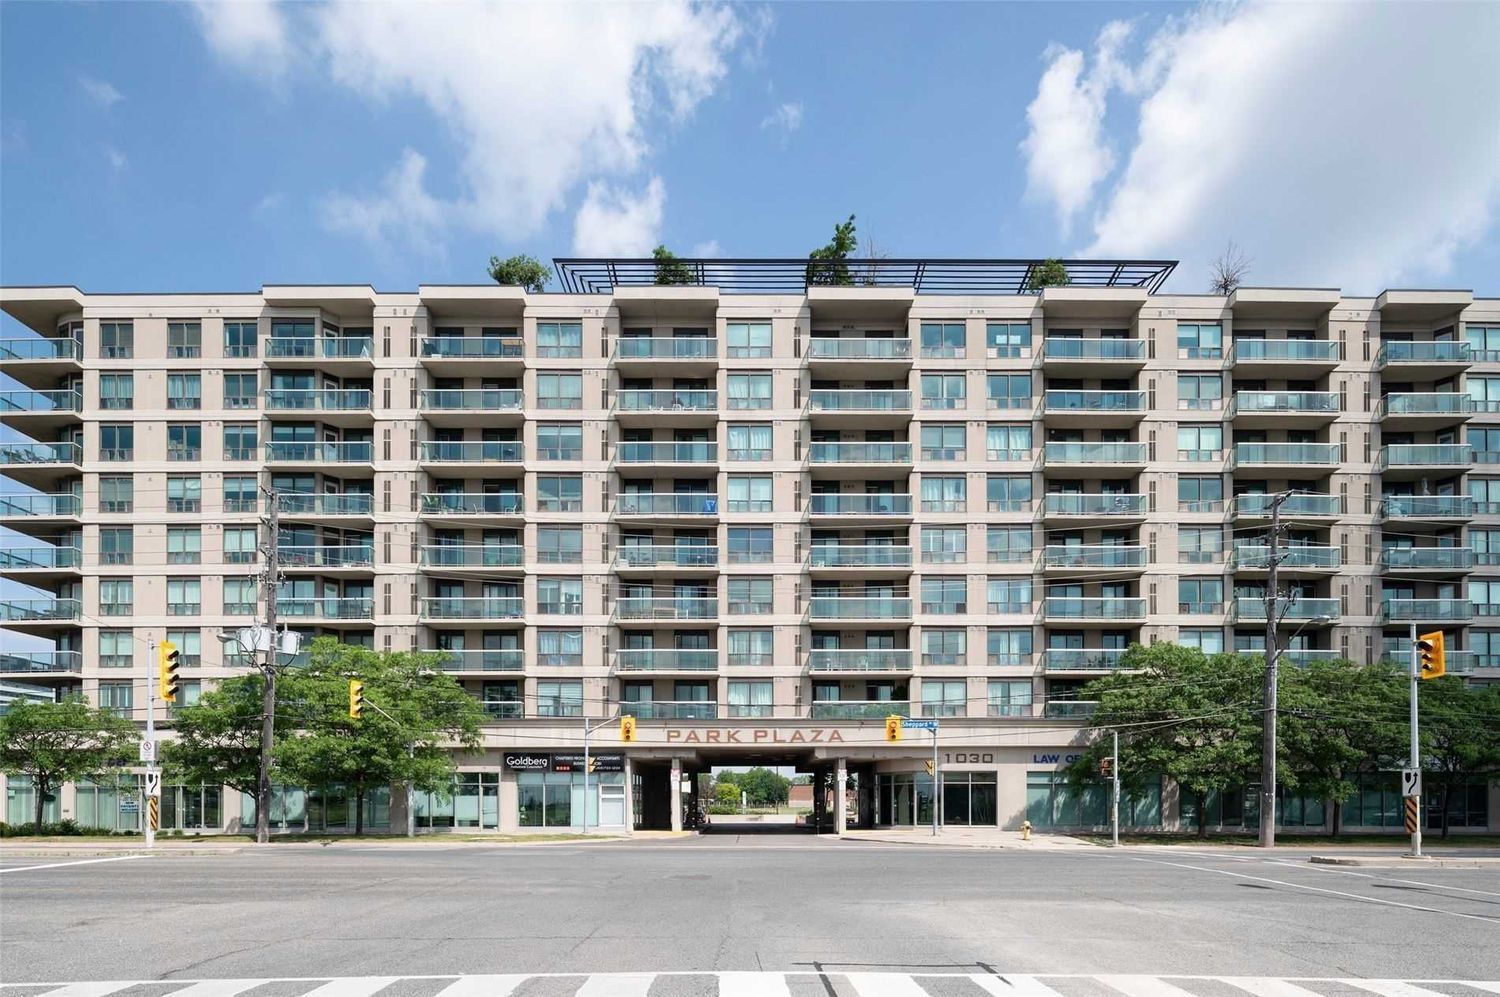 1030 Sheppard Avenue. Park Plaza Condos is located in  North York, Toronto - image #2 of 2